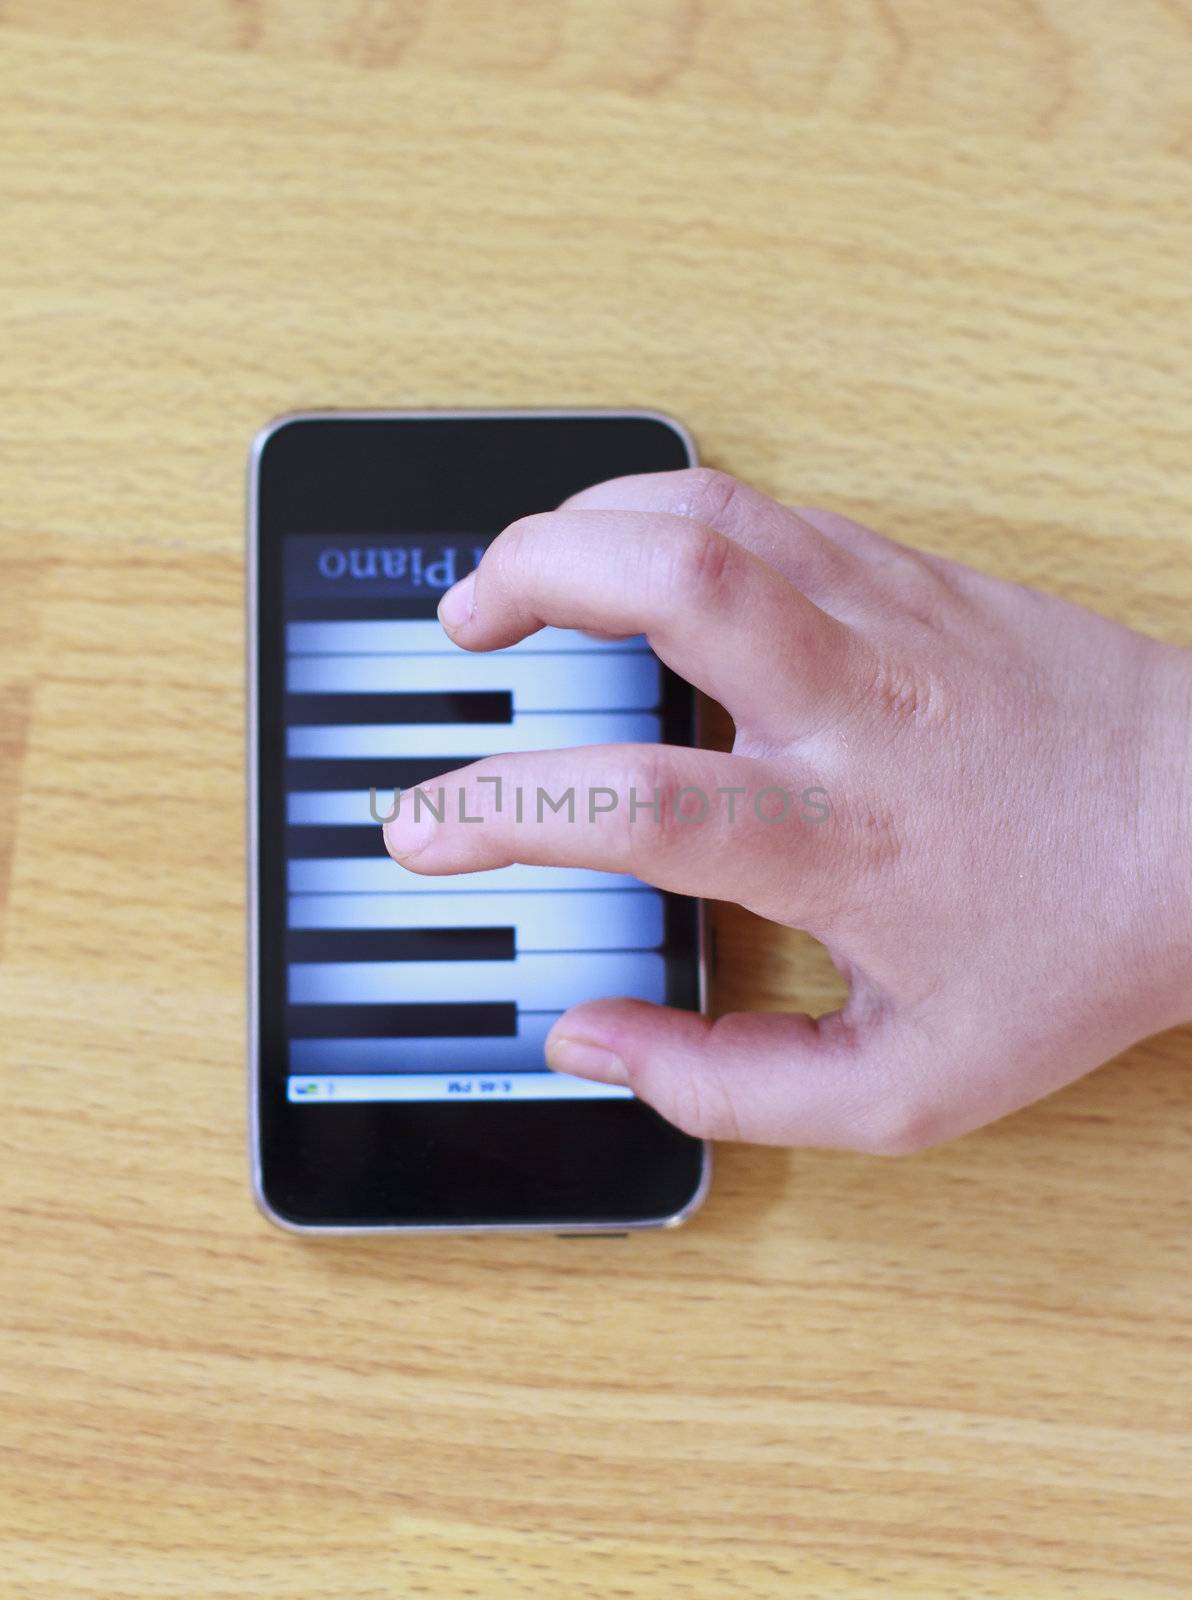 Playing piano on modern touch screen phone by manaemedia